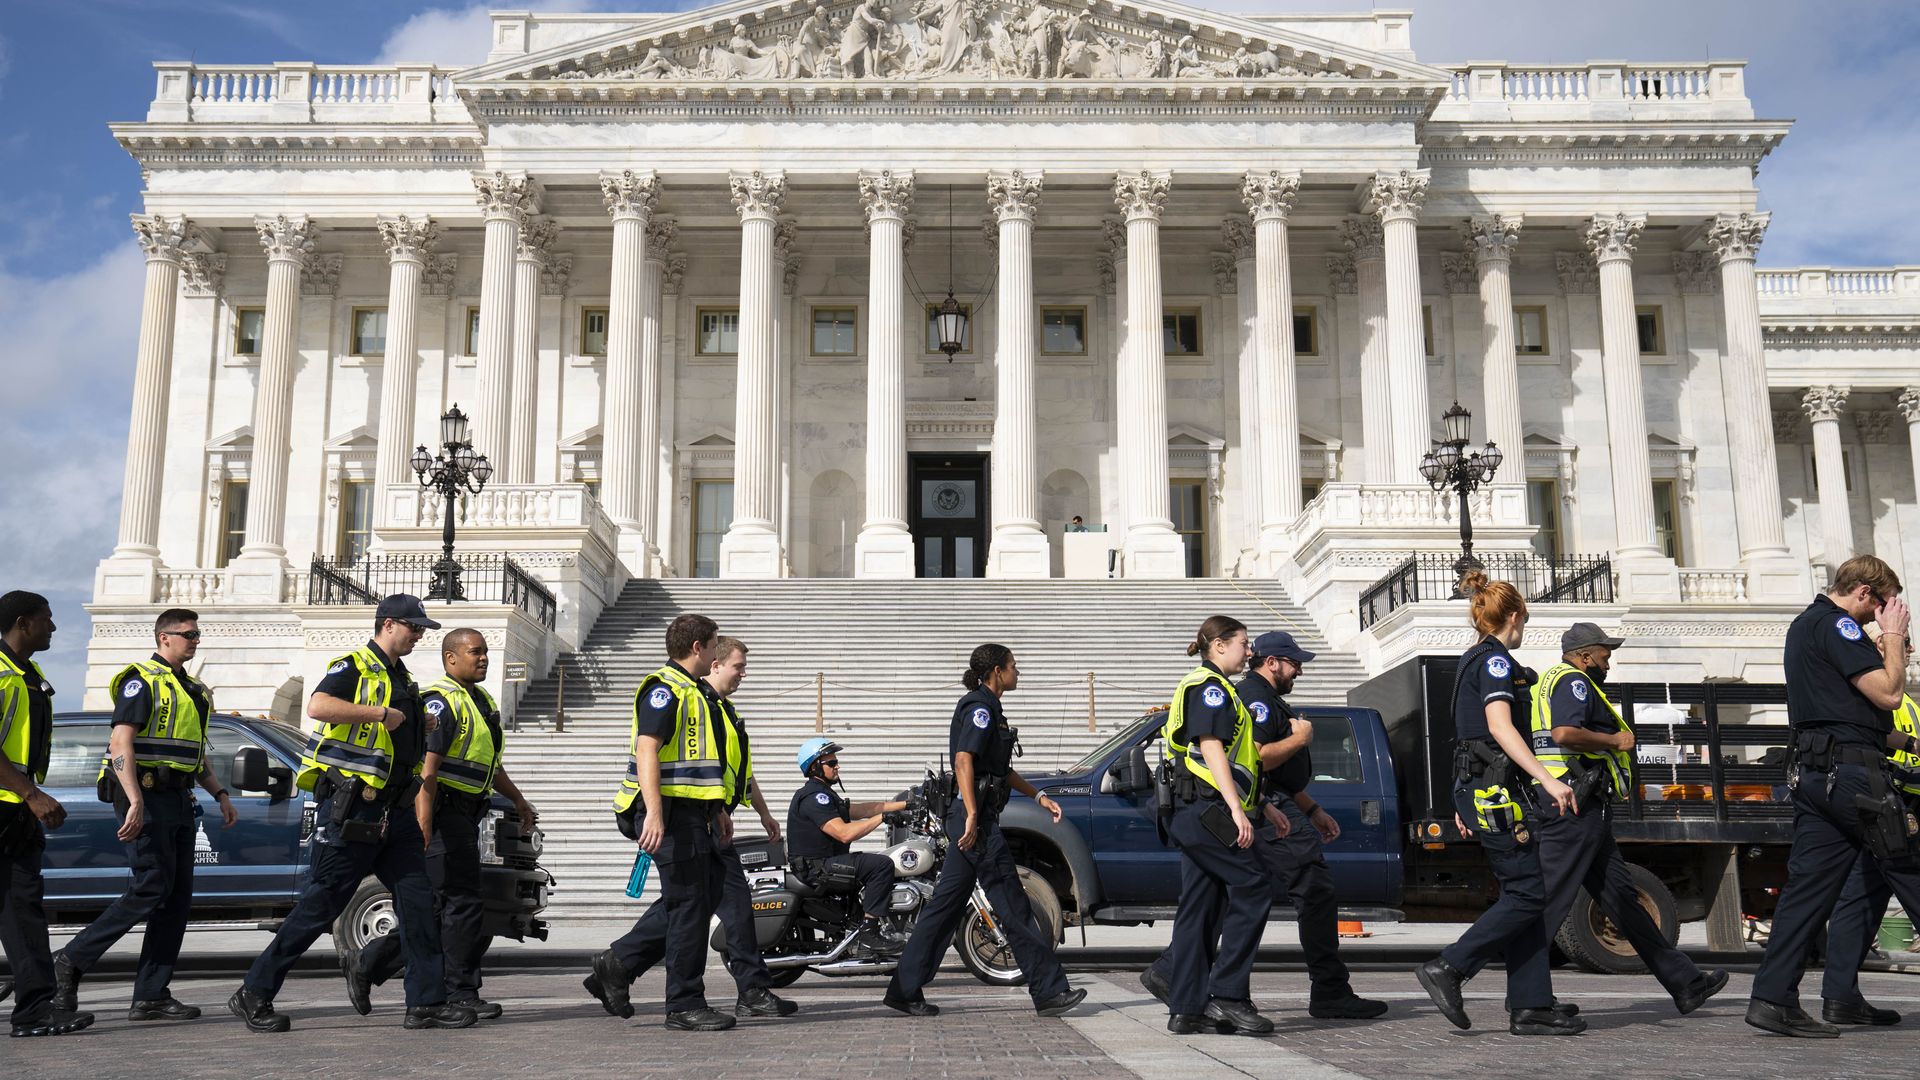 U.S. Capitol Police officers walk past the U.S. Capitol in Washington, D.C., U.S., on Tuesday, Sept. 21, 2021. House Democrats set up a Tuesday 